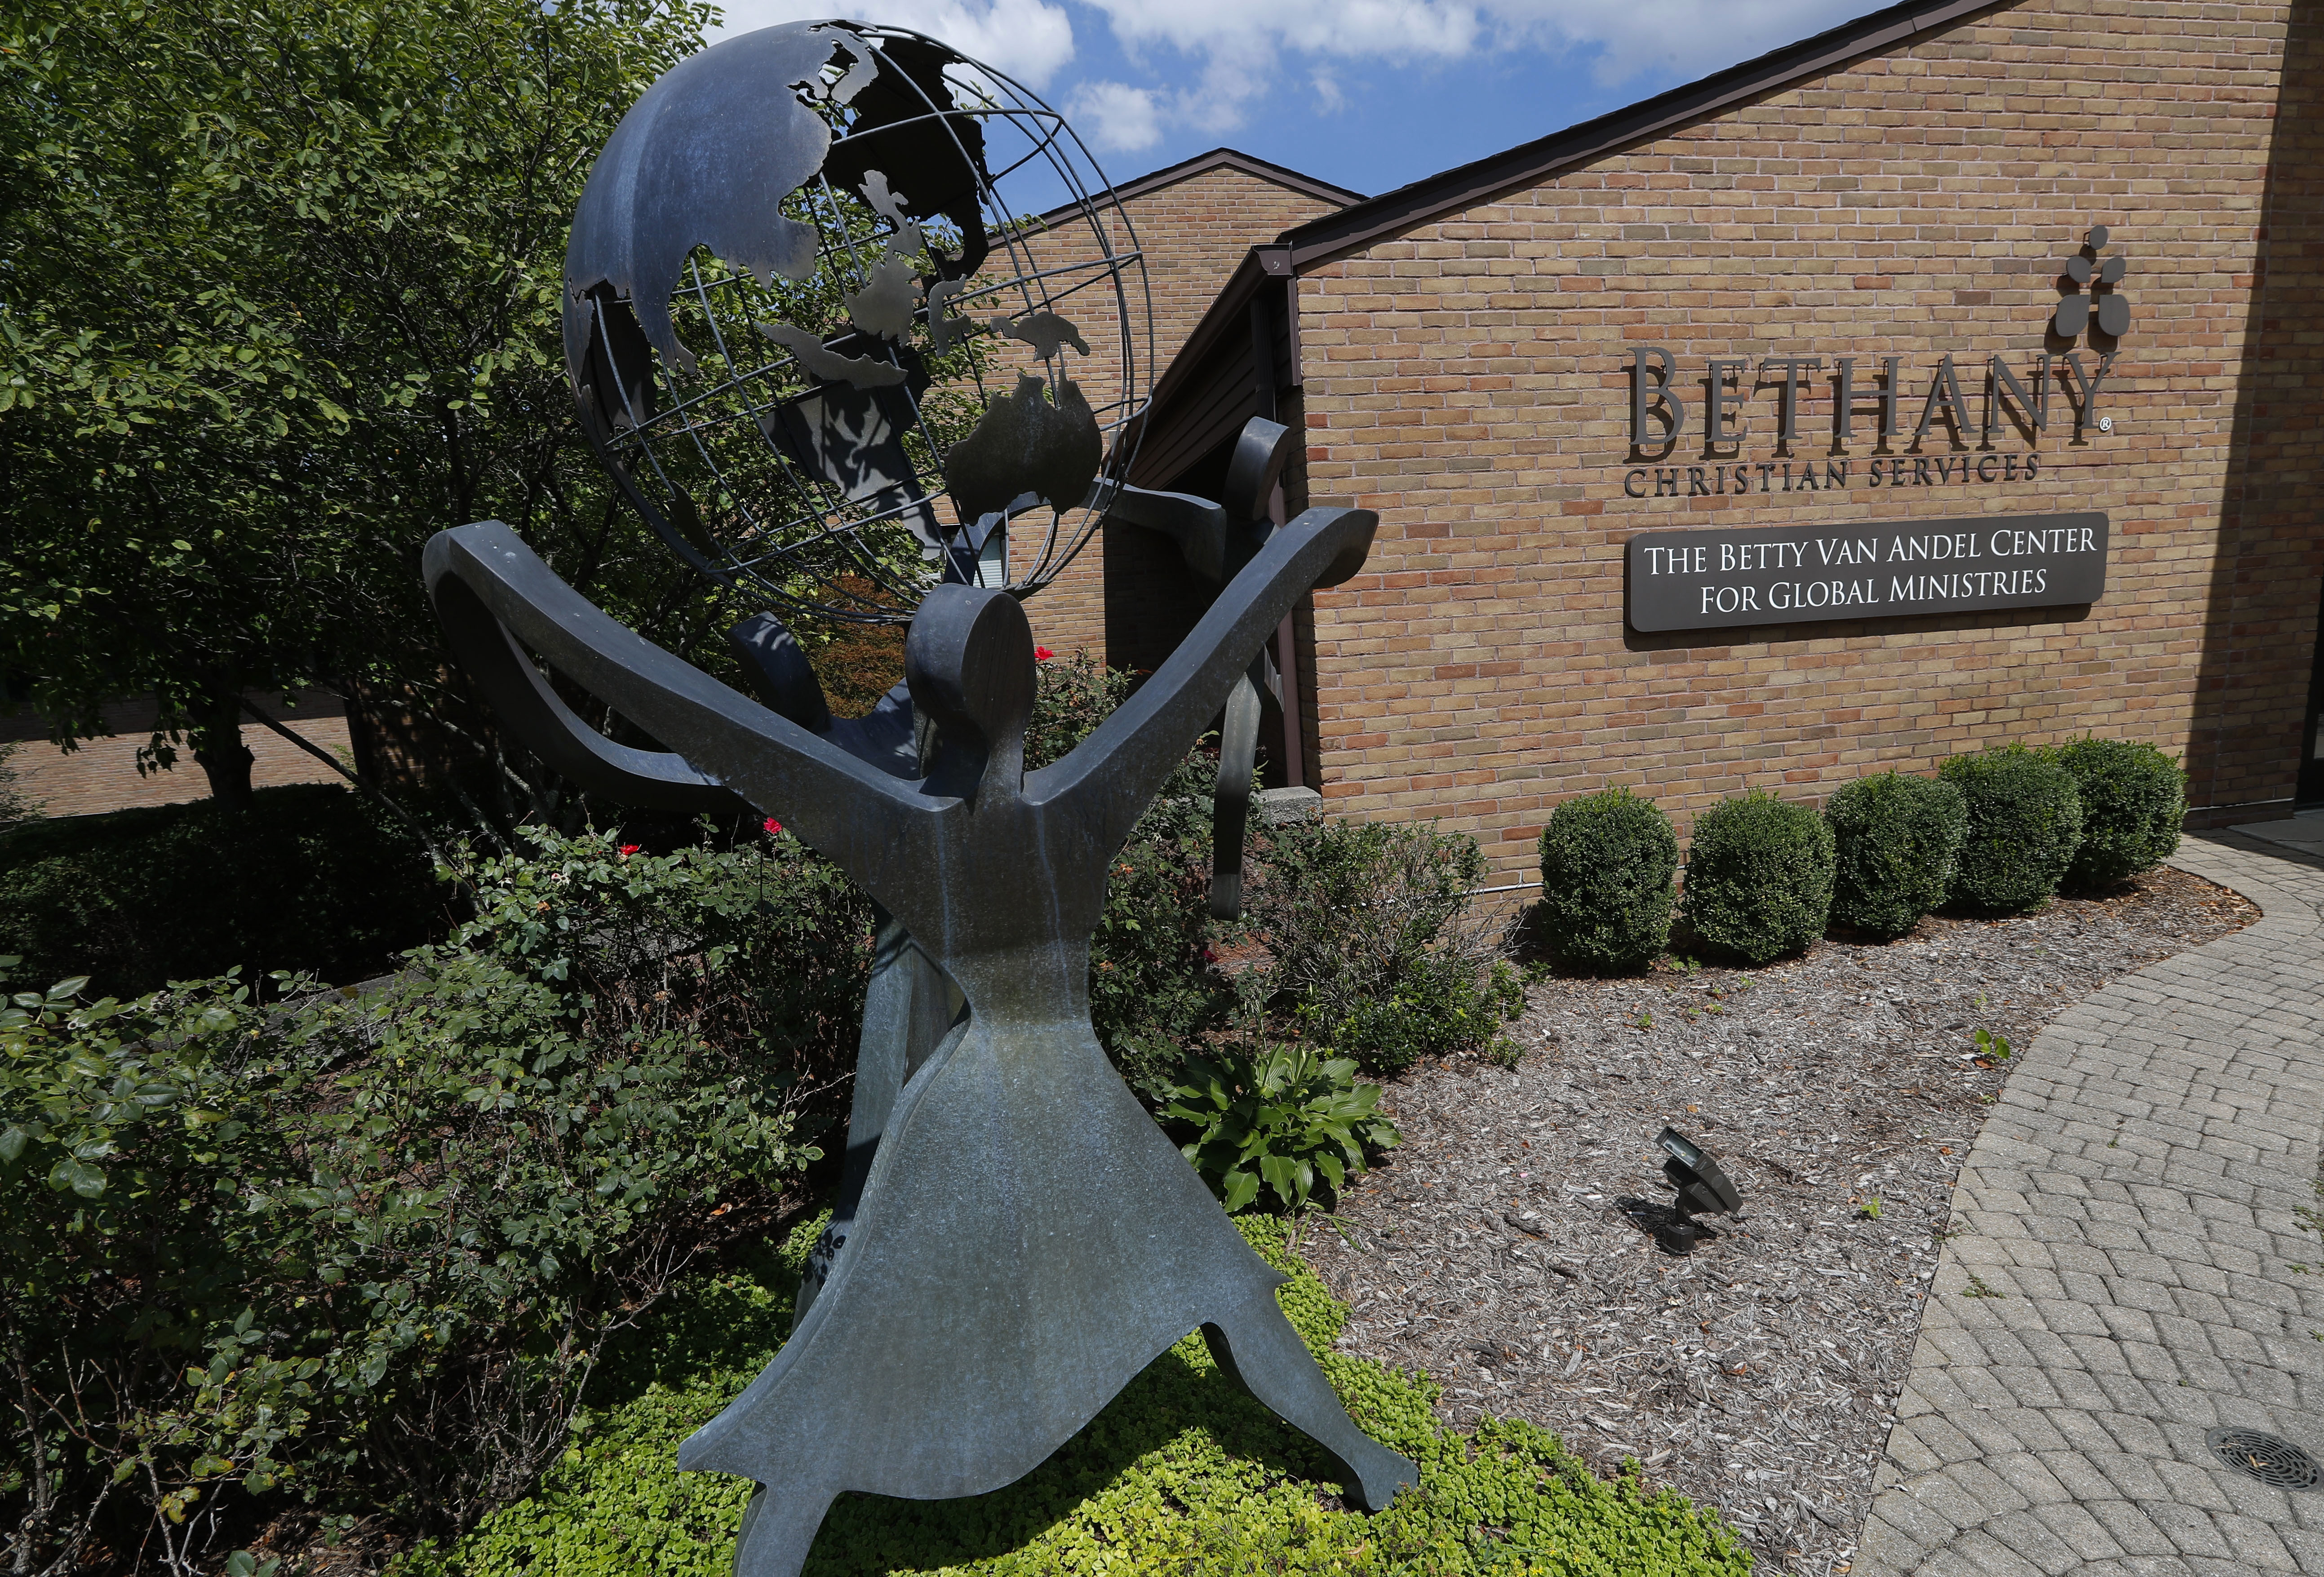 This Thursday, Aug. 23, 2018 photo shows the Bethany Christian Services in Grand Rapids, Mich. Bethany is one of the nation’s largest adoption agencies. (AP Photo/Paul Sancya)